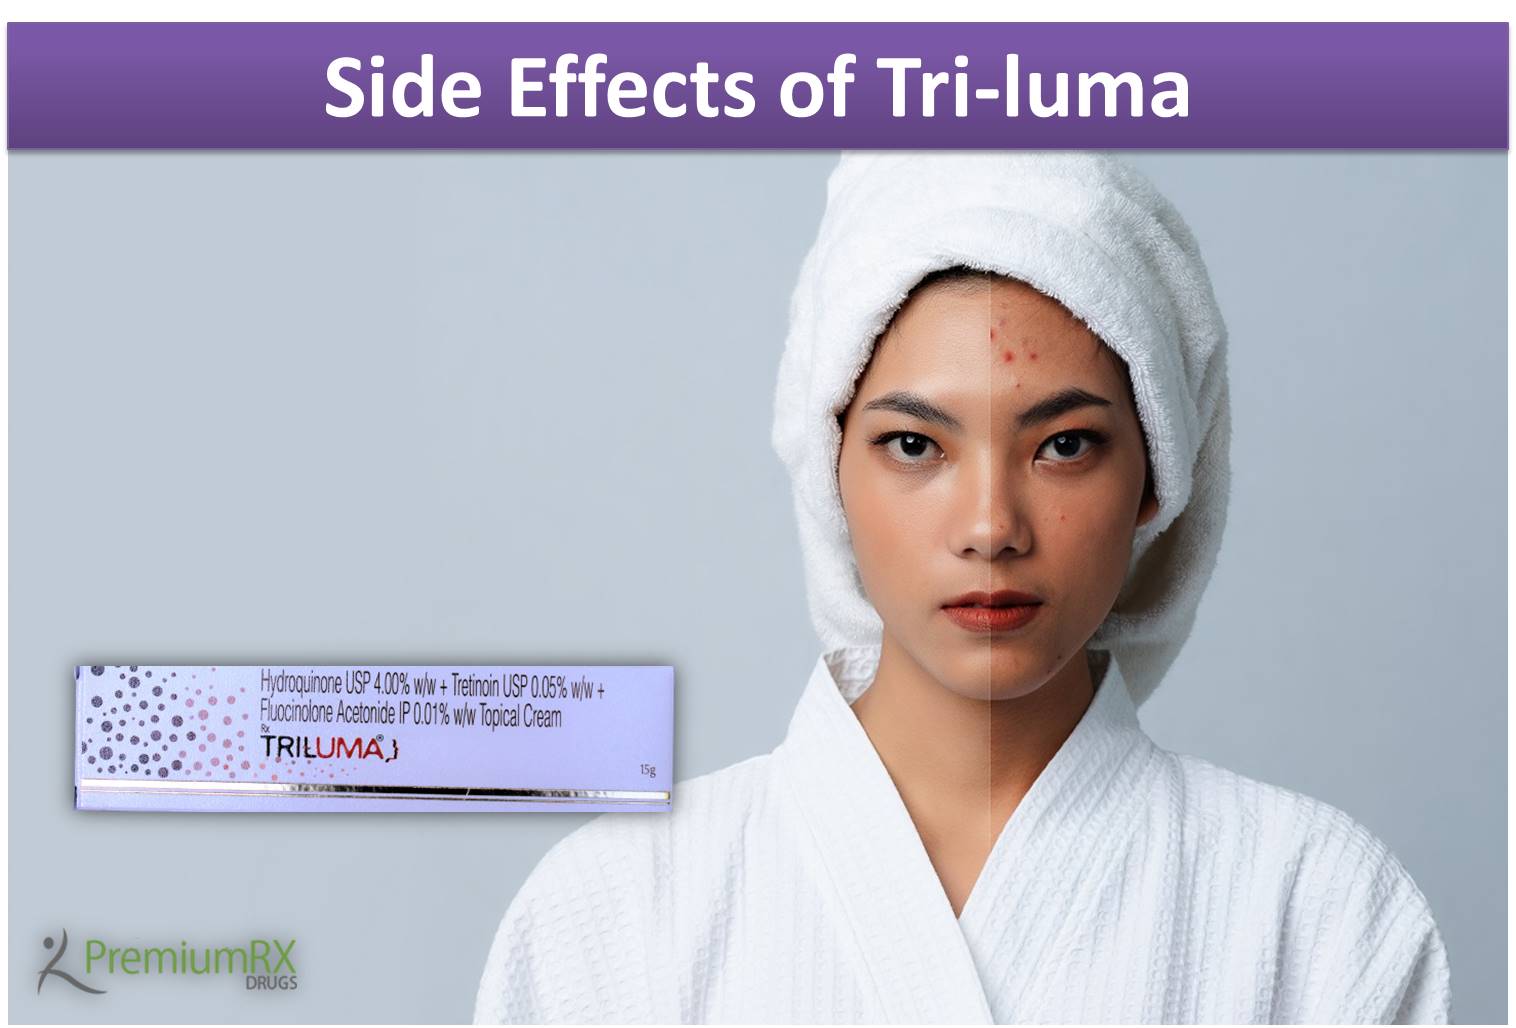 What are the side effects of Tri-luma?